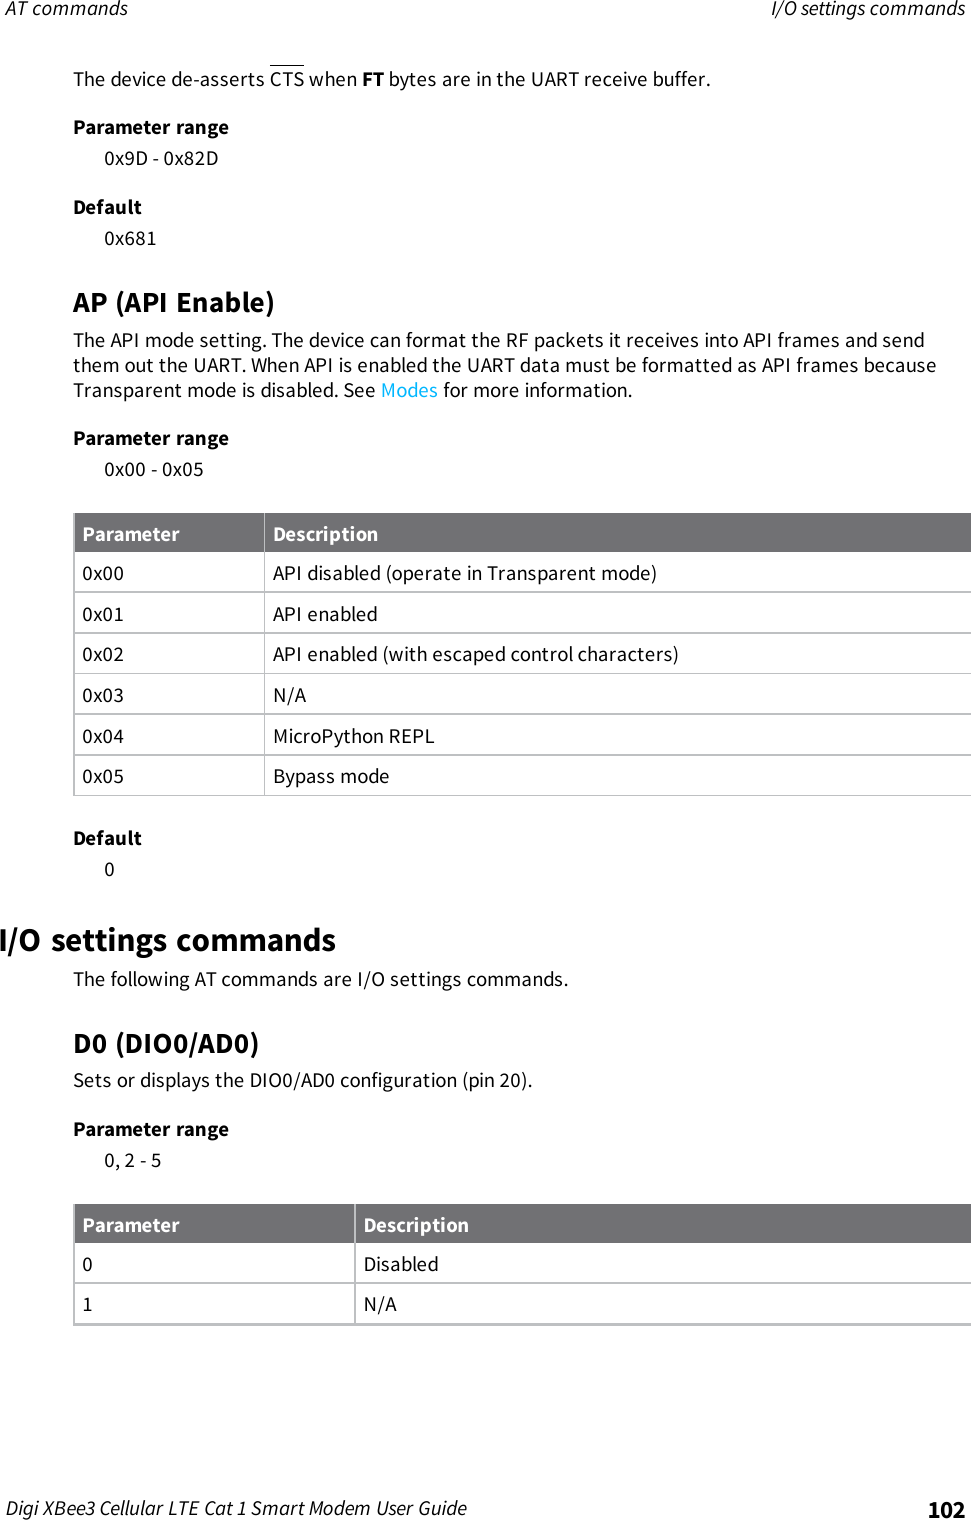 AT commands I/O settings commandsDigi XBee3 Cellular LTE Cat 1 Smart Modem User Guide 102The device de-asserts CTS when FT bytes are in the UART receive buffer.Parameter range0x9D - 0x82DDefault0x681AP (API Enable)The API mode setting. The device can format the RF packets it receives into API frames and sendthem out the UART. When API is enabled the UART data must be formatted as API frames becauseTransparent mode is disabled. See Modes for more information.Parameter range0x00 - 0x05Parameter Description0x00 API disabled (operate in Transparent mode)0x01 API enabled0x02 API enabled (with escaped control characters)0x03 N/A0x04 MicroPython REPL0x05 Bypass modeDefault0I/O settings commandsThe following AT commands are I/O settings commands.D0 (DIO0/AD0)Sets or displays the DIO0/AD0 configuration (pin 20).Parameter range0, 2 - 5Parameter Description0 Disabled1 N/A